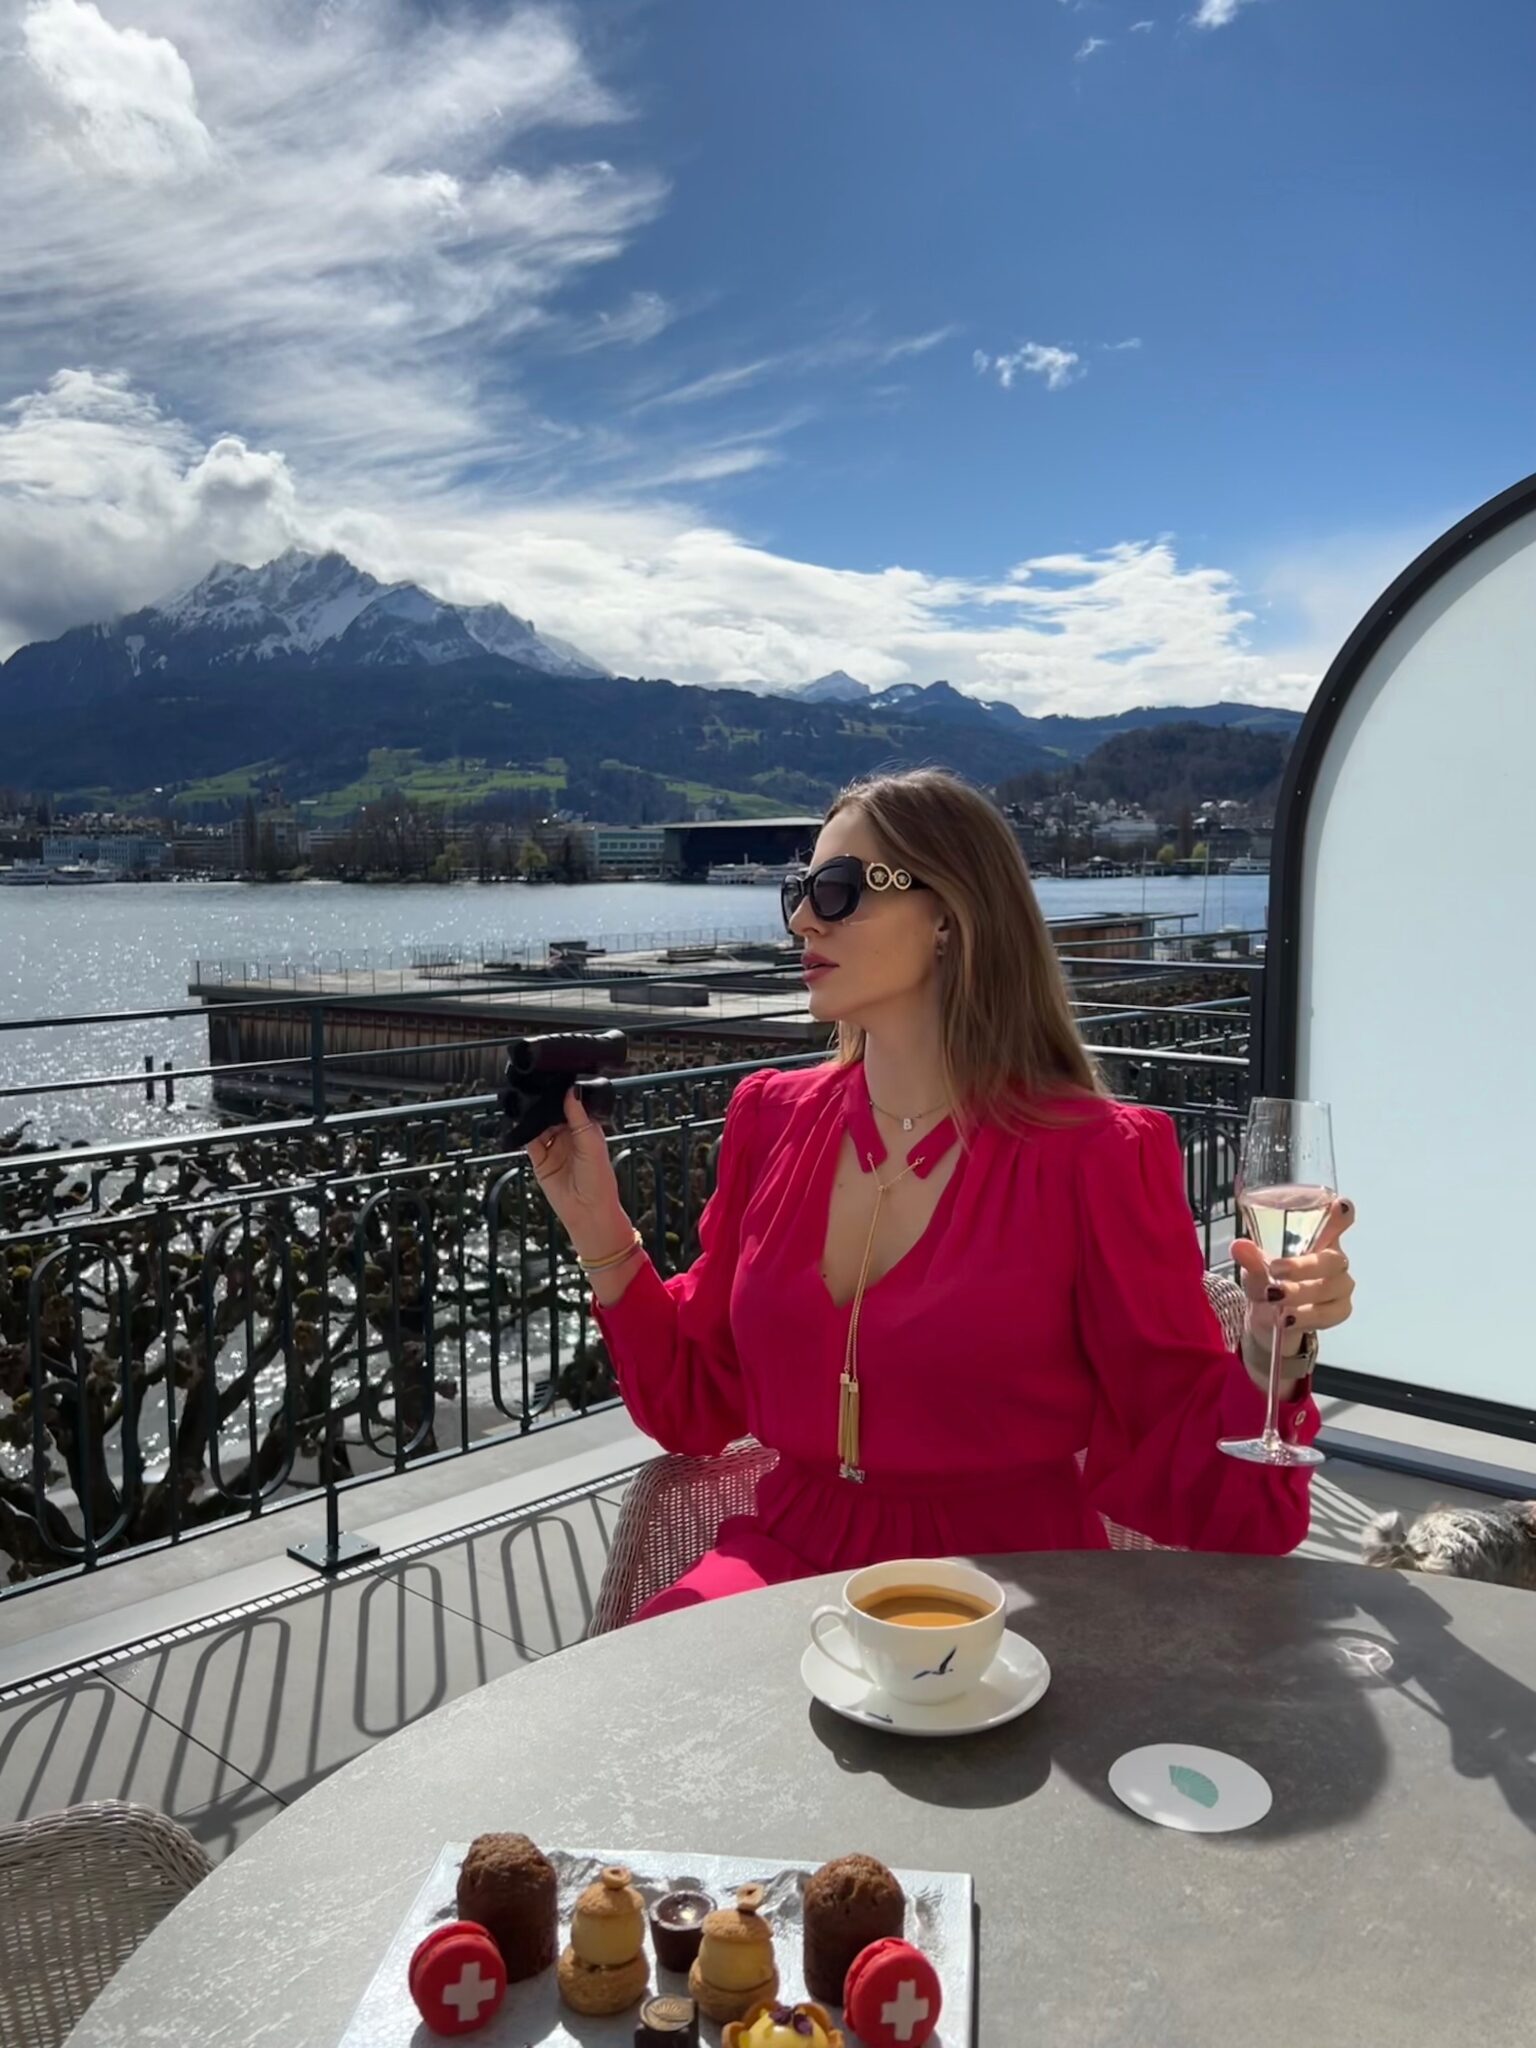 Mandarin Oriental Palace Luzern. A Historic Belle Epoque Palace reopened in 2022. /A magnificent hotel with a panoramic view of Lake Lucerne./ 6